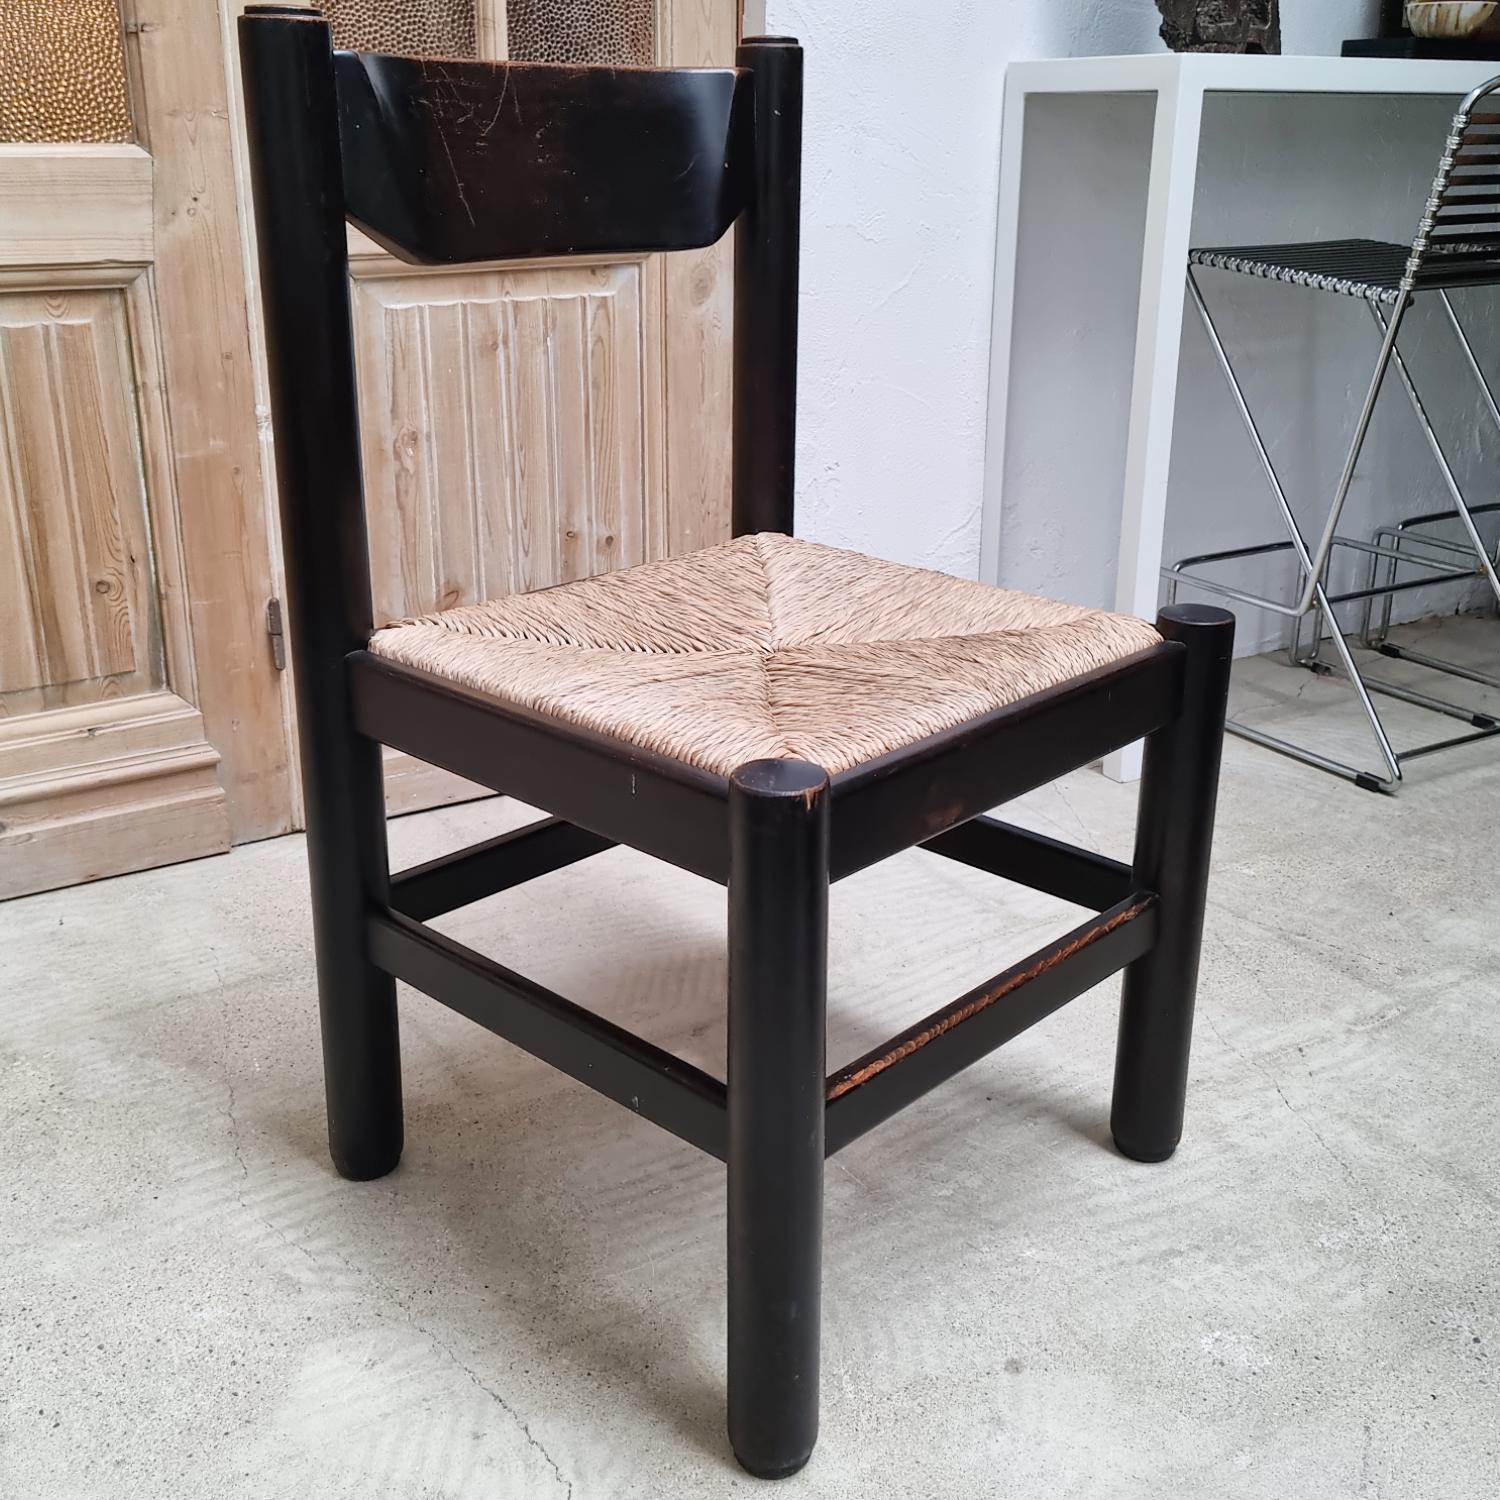 Decorative and contemporary set of dining room chairs attributed to Vico Magistretti. Made of solid wood, painted black and rush seat. Fits perfectly in the interiors where honest and natural materials are used.

The paintwork is fully functional